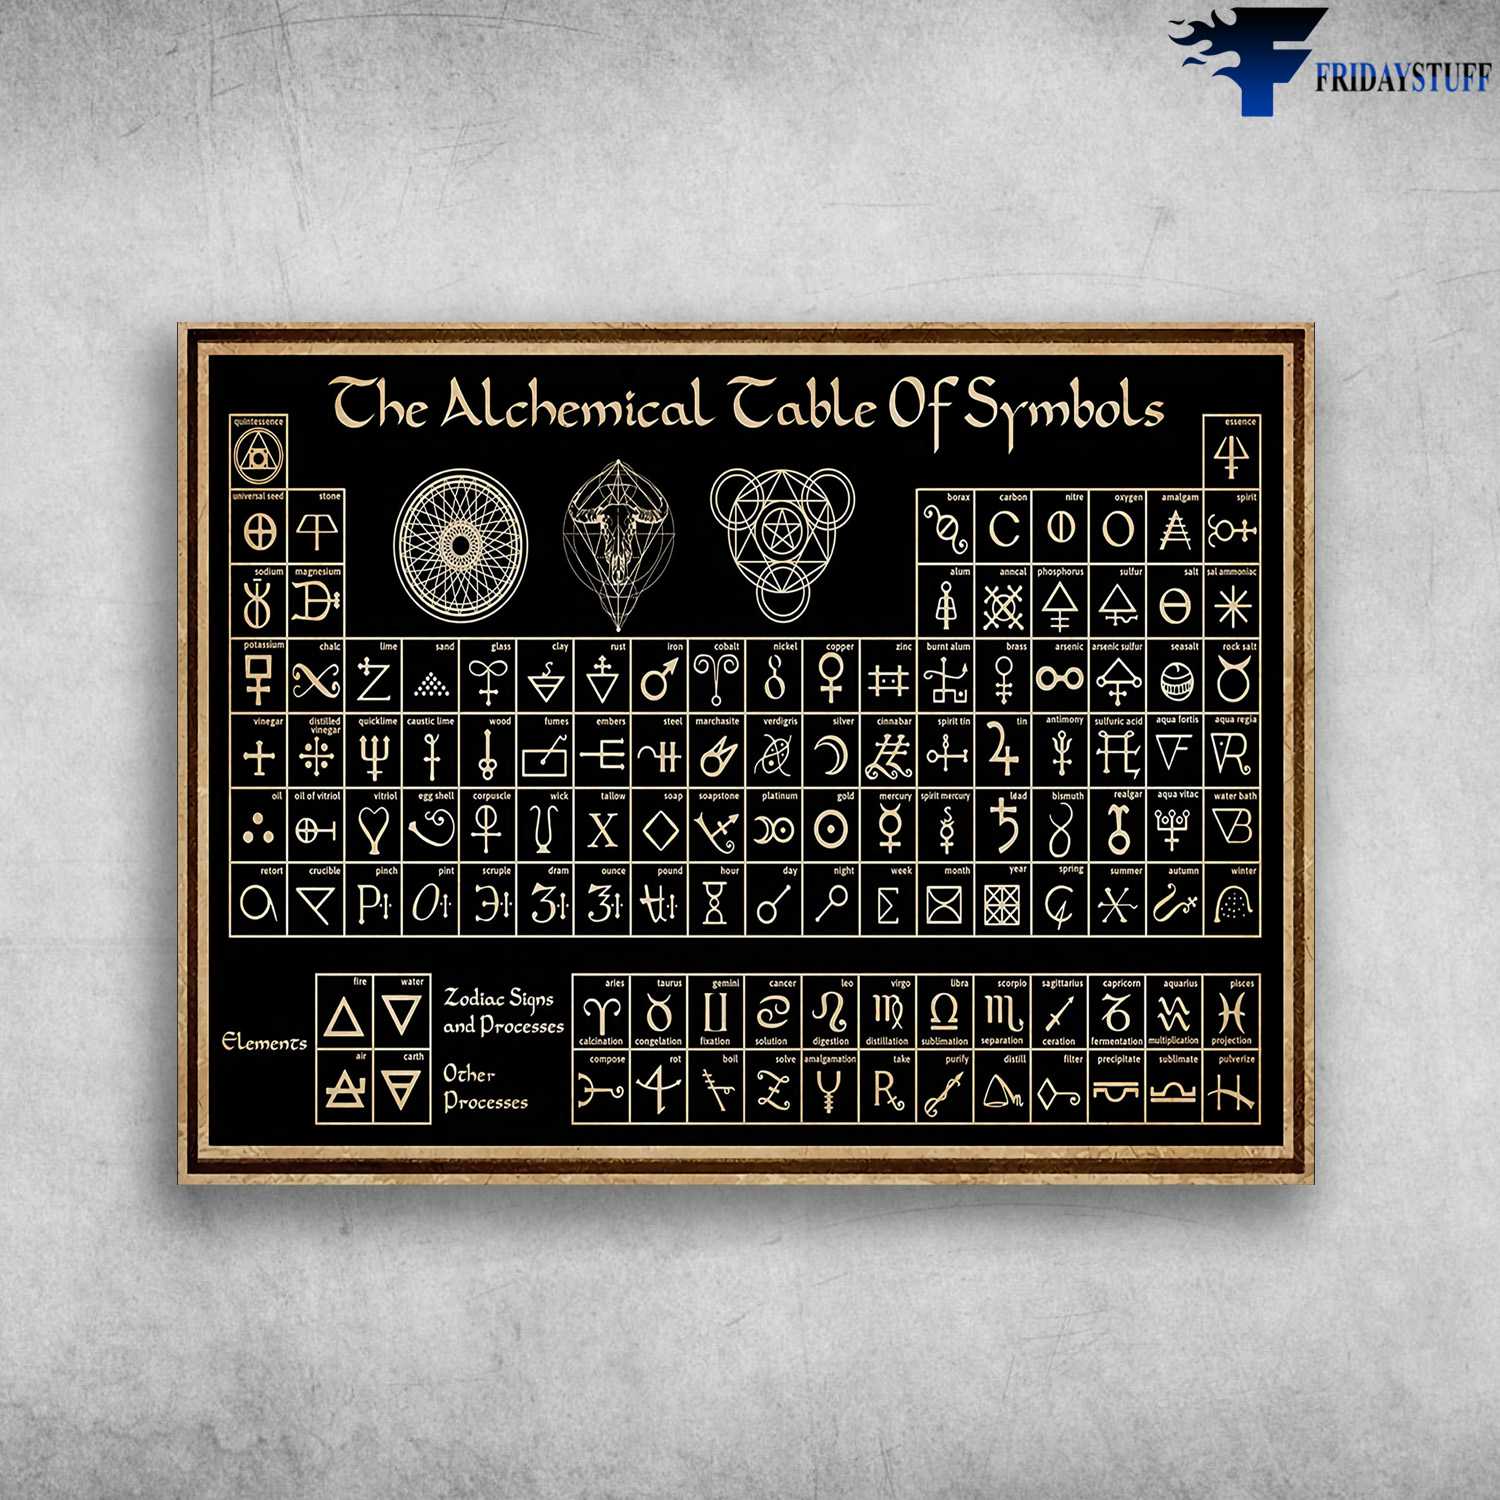 The Alchemical Table Of Symbols, Alchemical Poster, Zodiac Signs, Ocher Processes